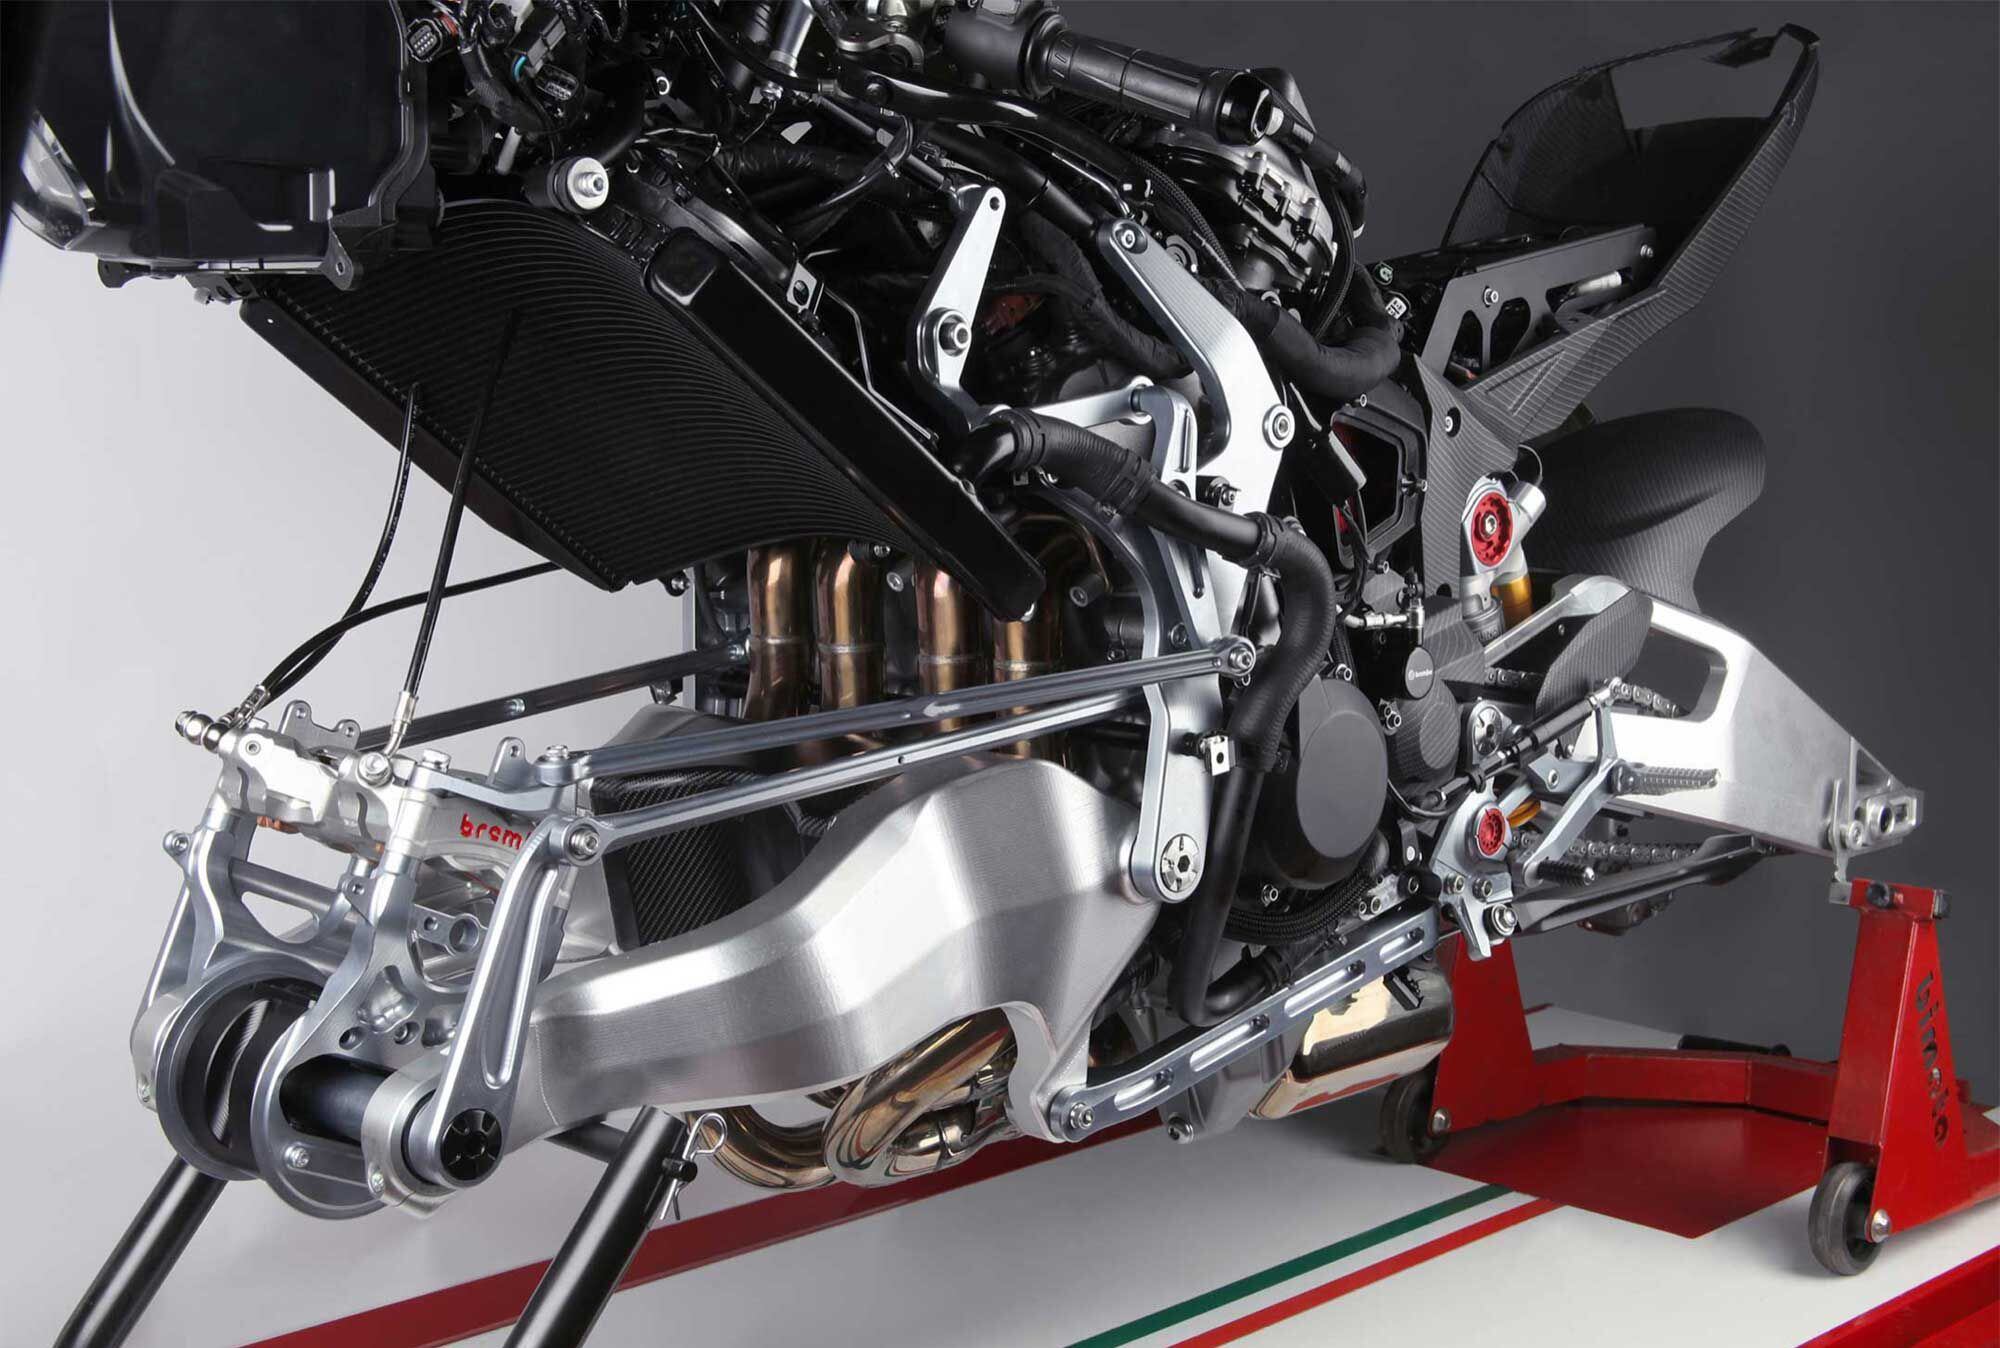 Get naked! The magical front-hub steering and front-swingarm suspension of the Bimota Tesi H2.